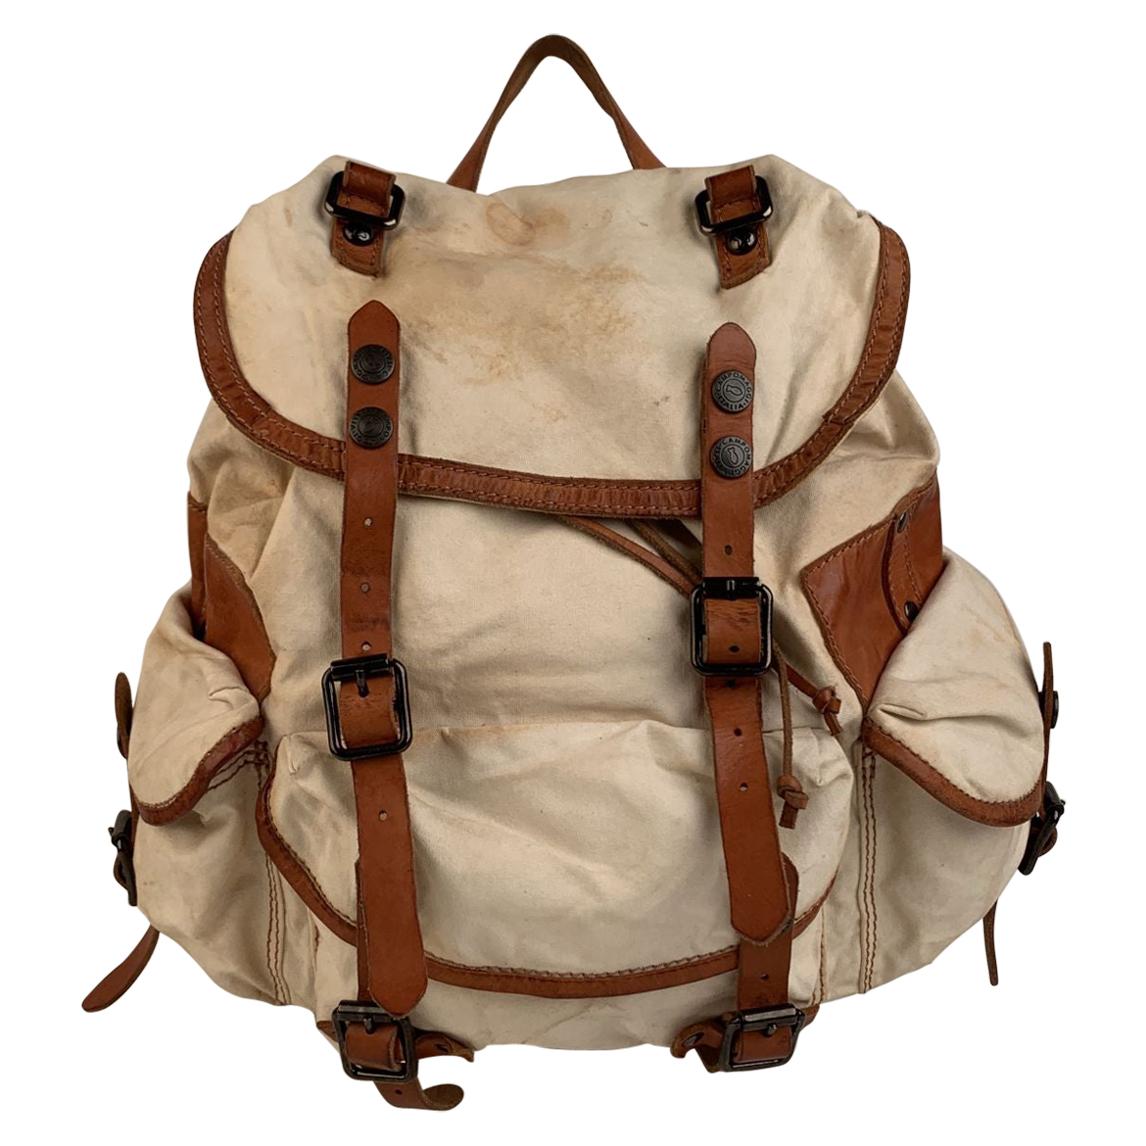 Campomaggi Teodorano Ivory Canvas and Leather Backpack